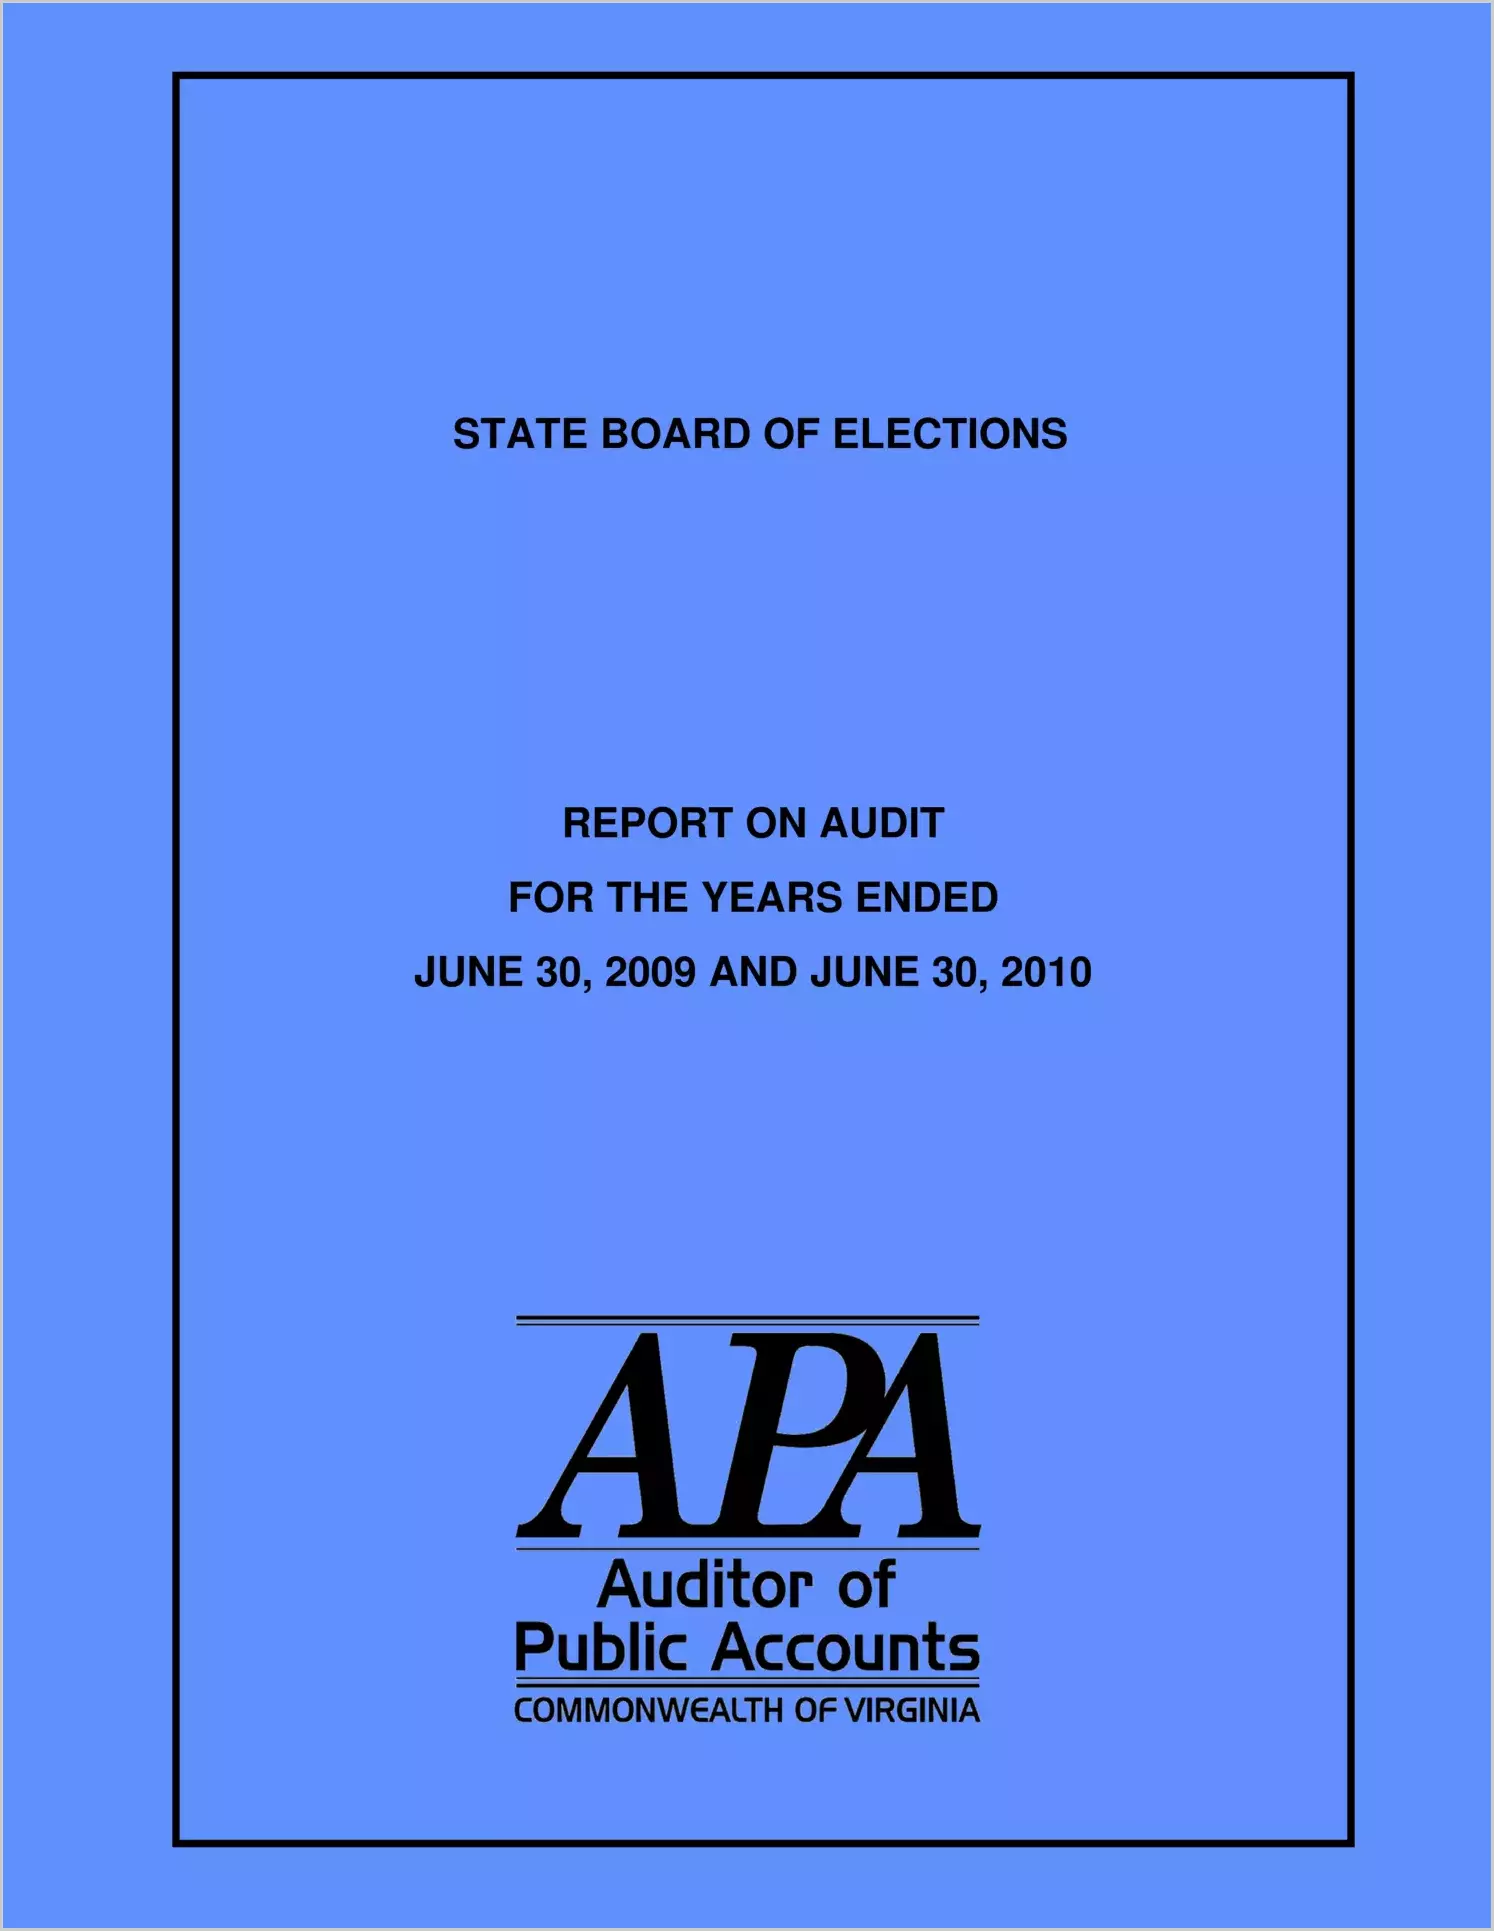 State Board of Elections For the years ended June 30, 2009 and June 30, 2010.